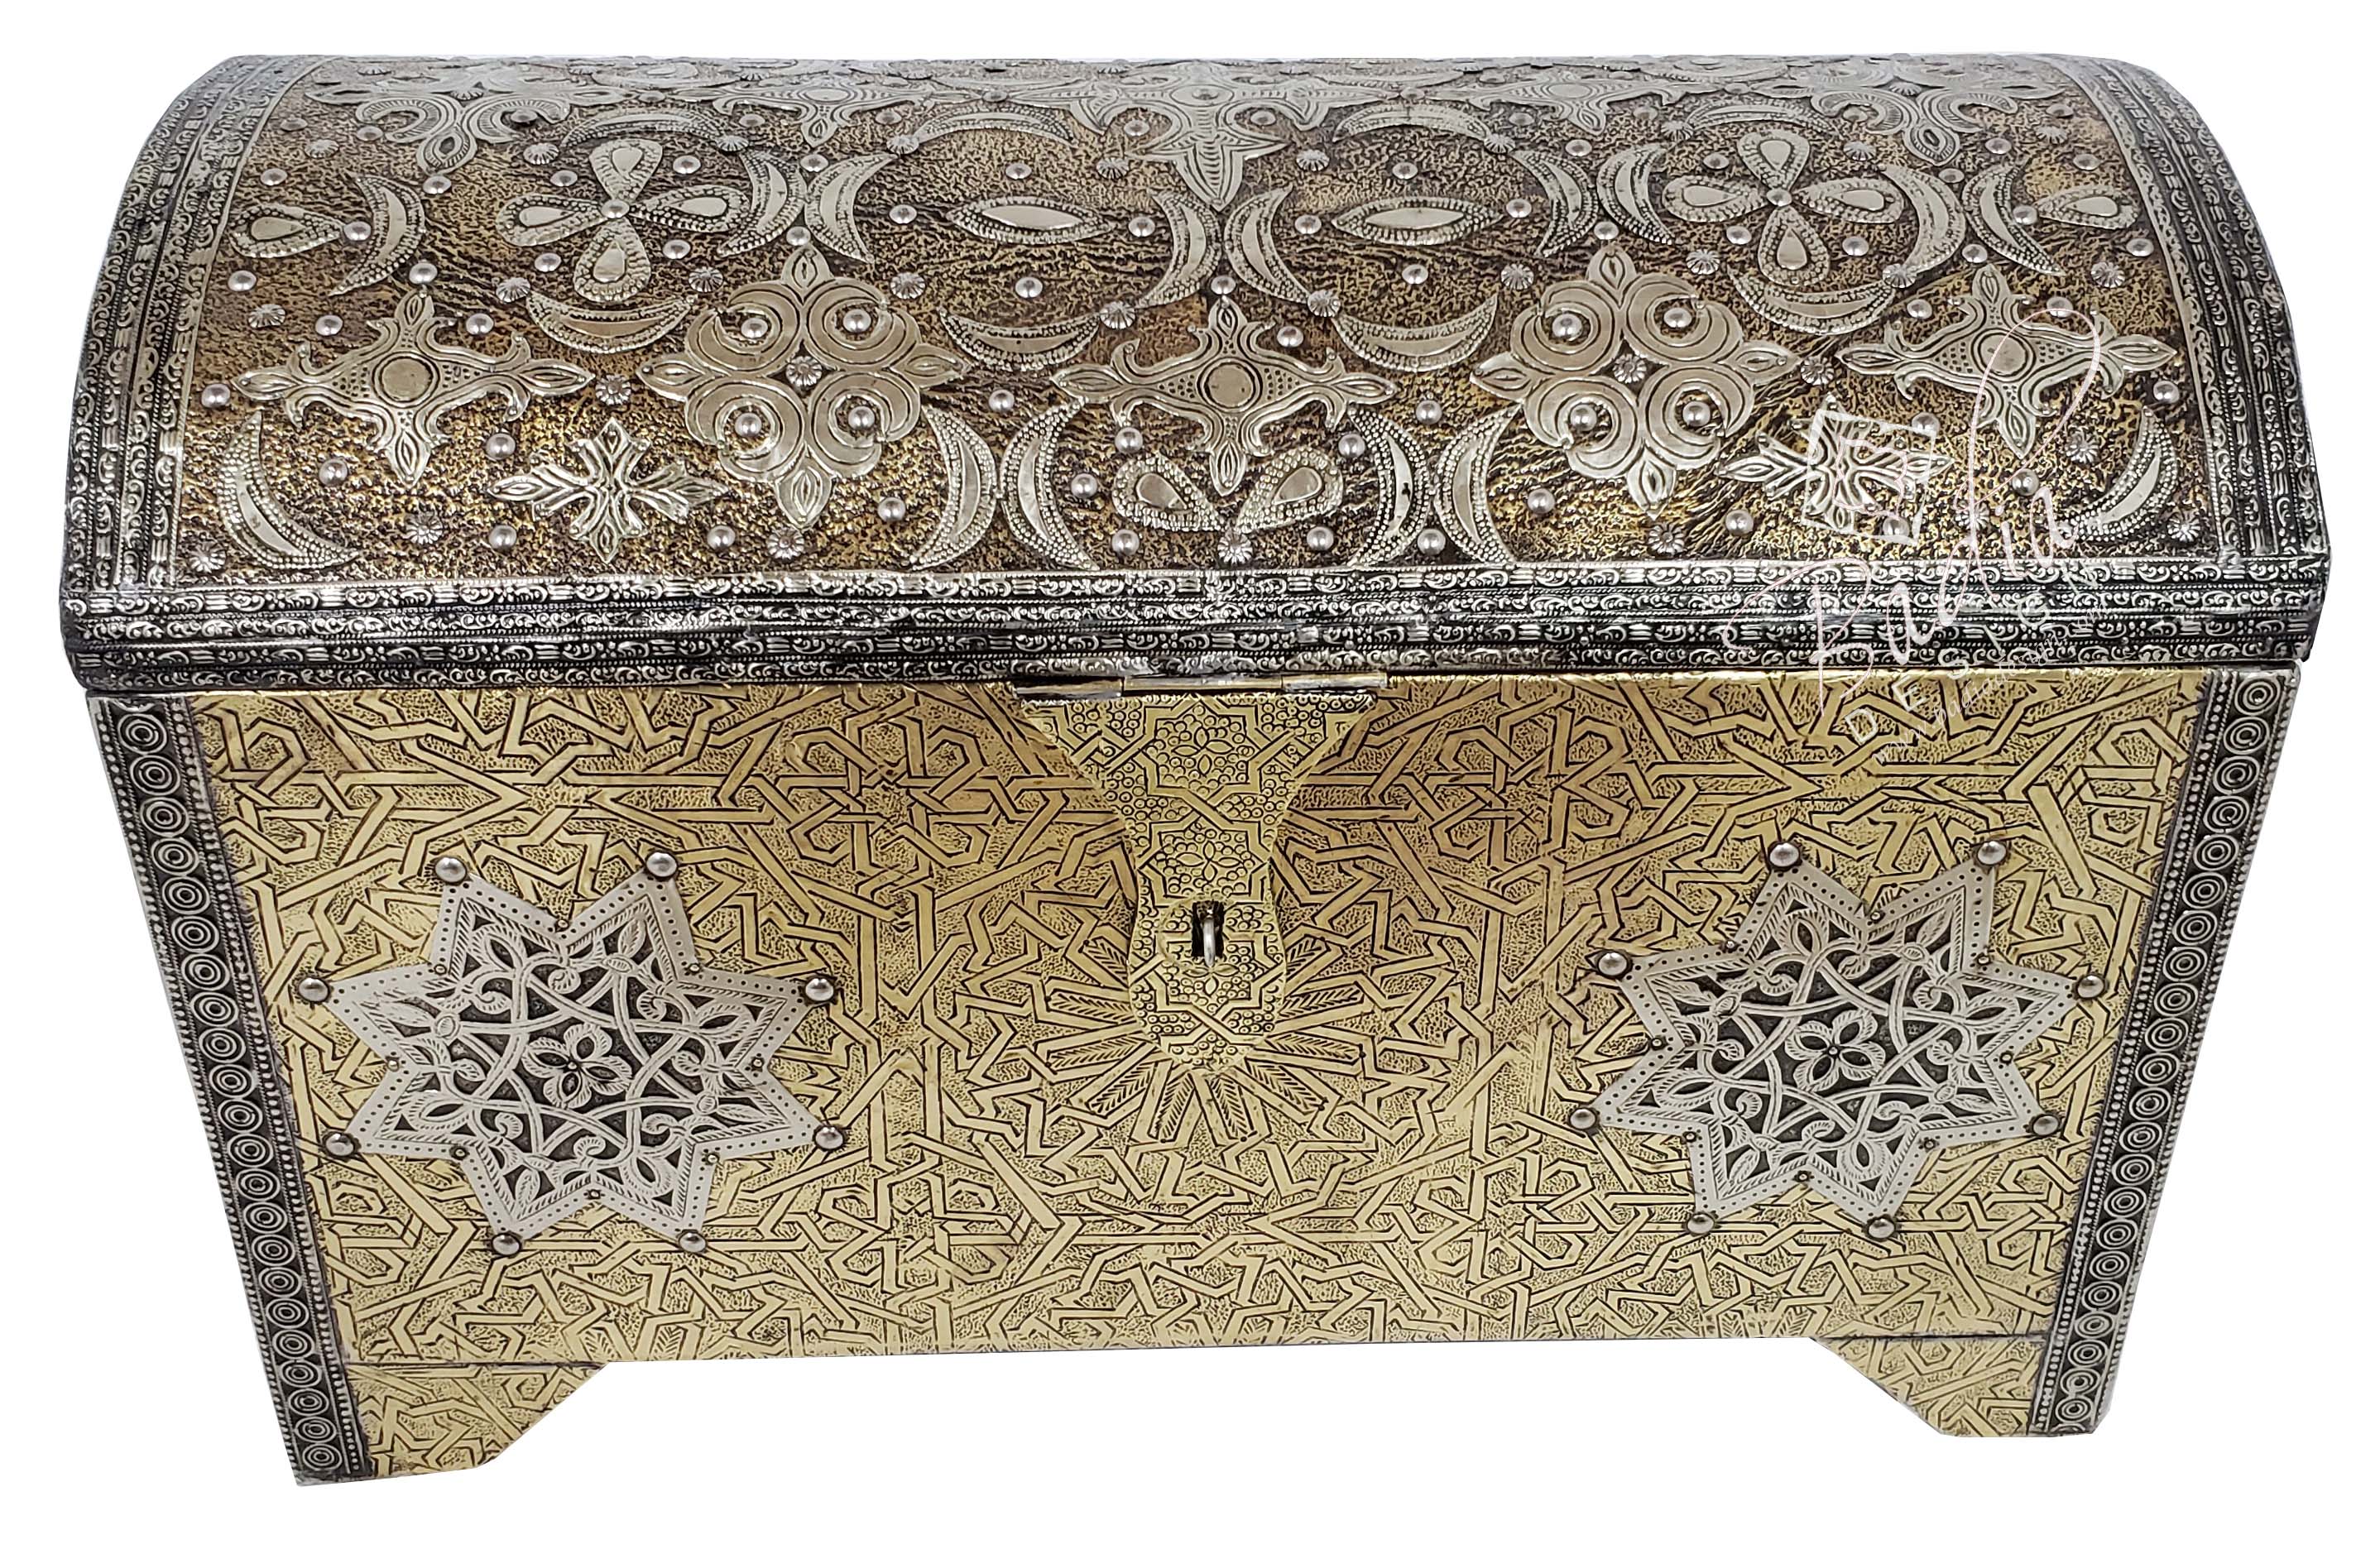 moroccan-hand-carved-brass-trunk-br-t001-1.jpg